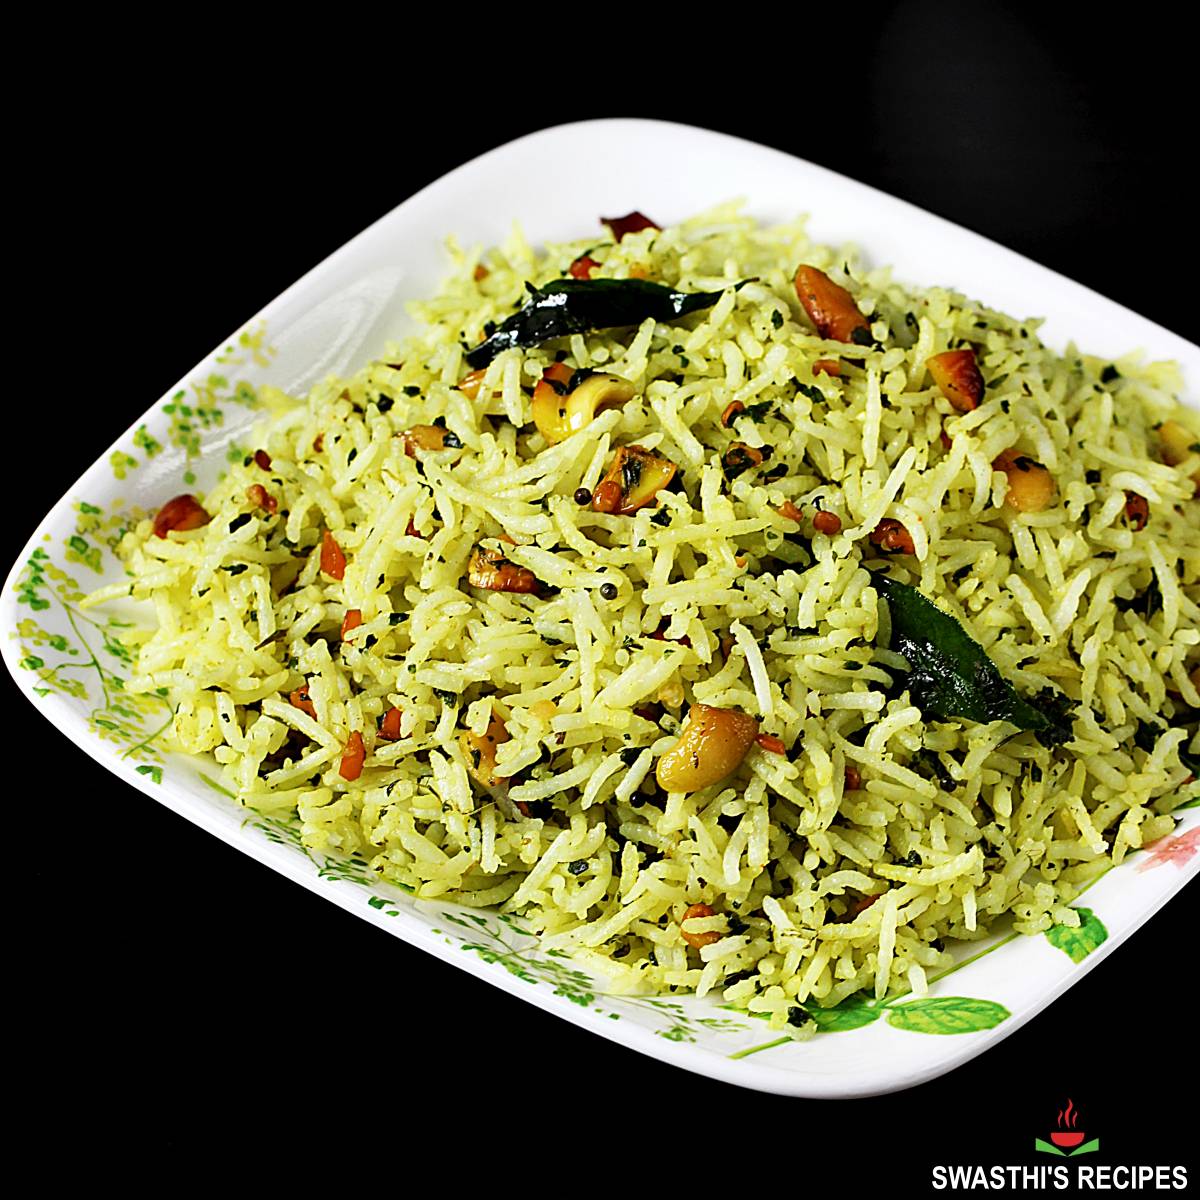 Pudina Rice made in South Indian Style